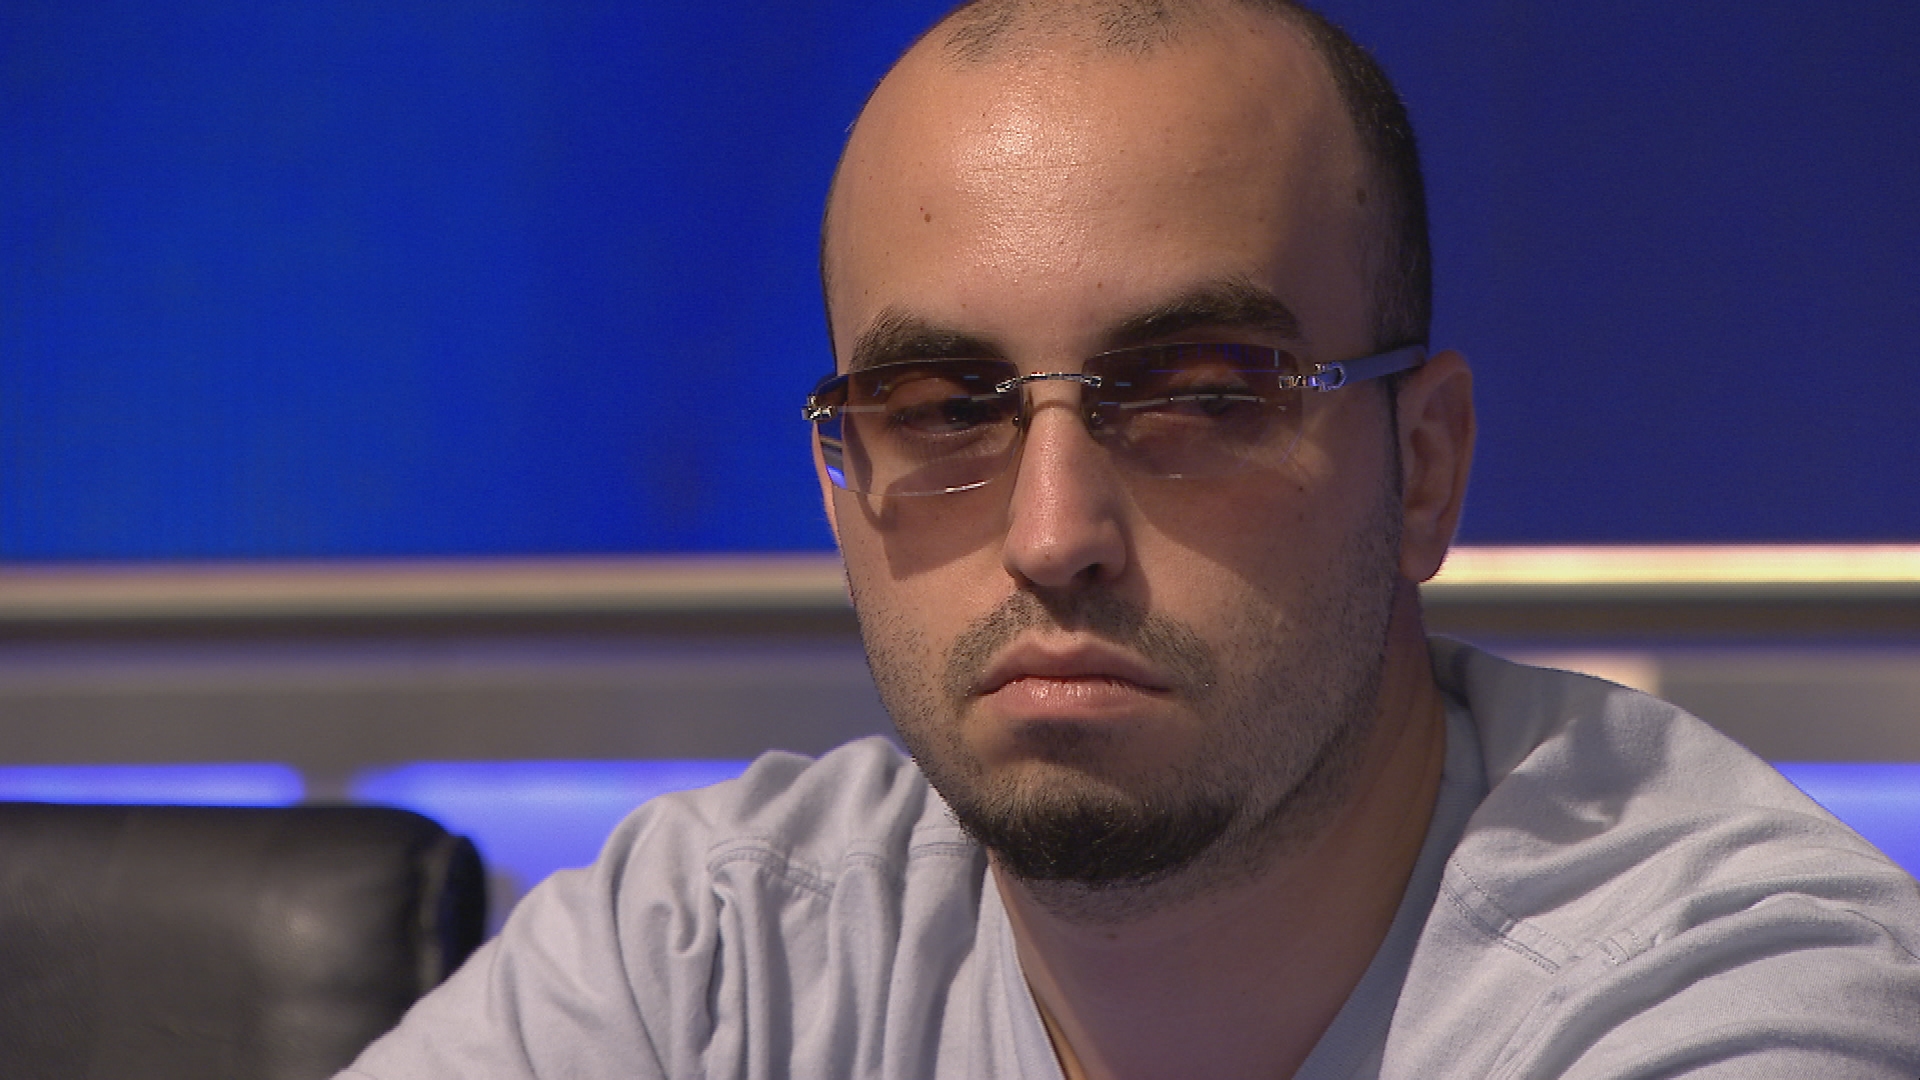 New rule for EPT: 20% of players make money!